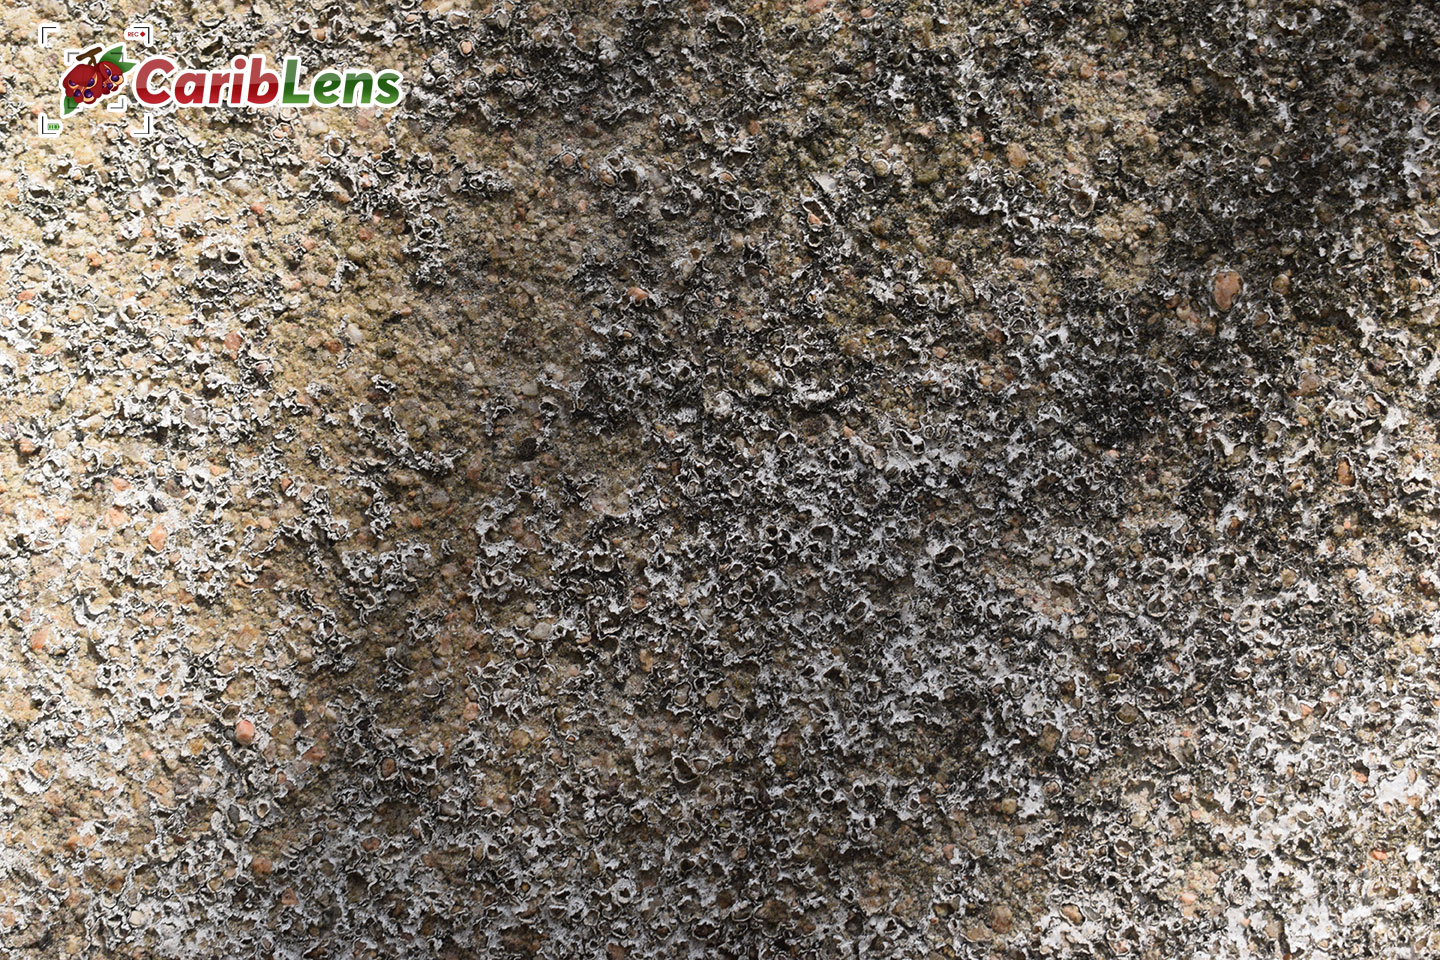 Grunge Concrete Wall Background Texture Free Image Download